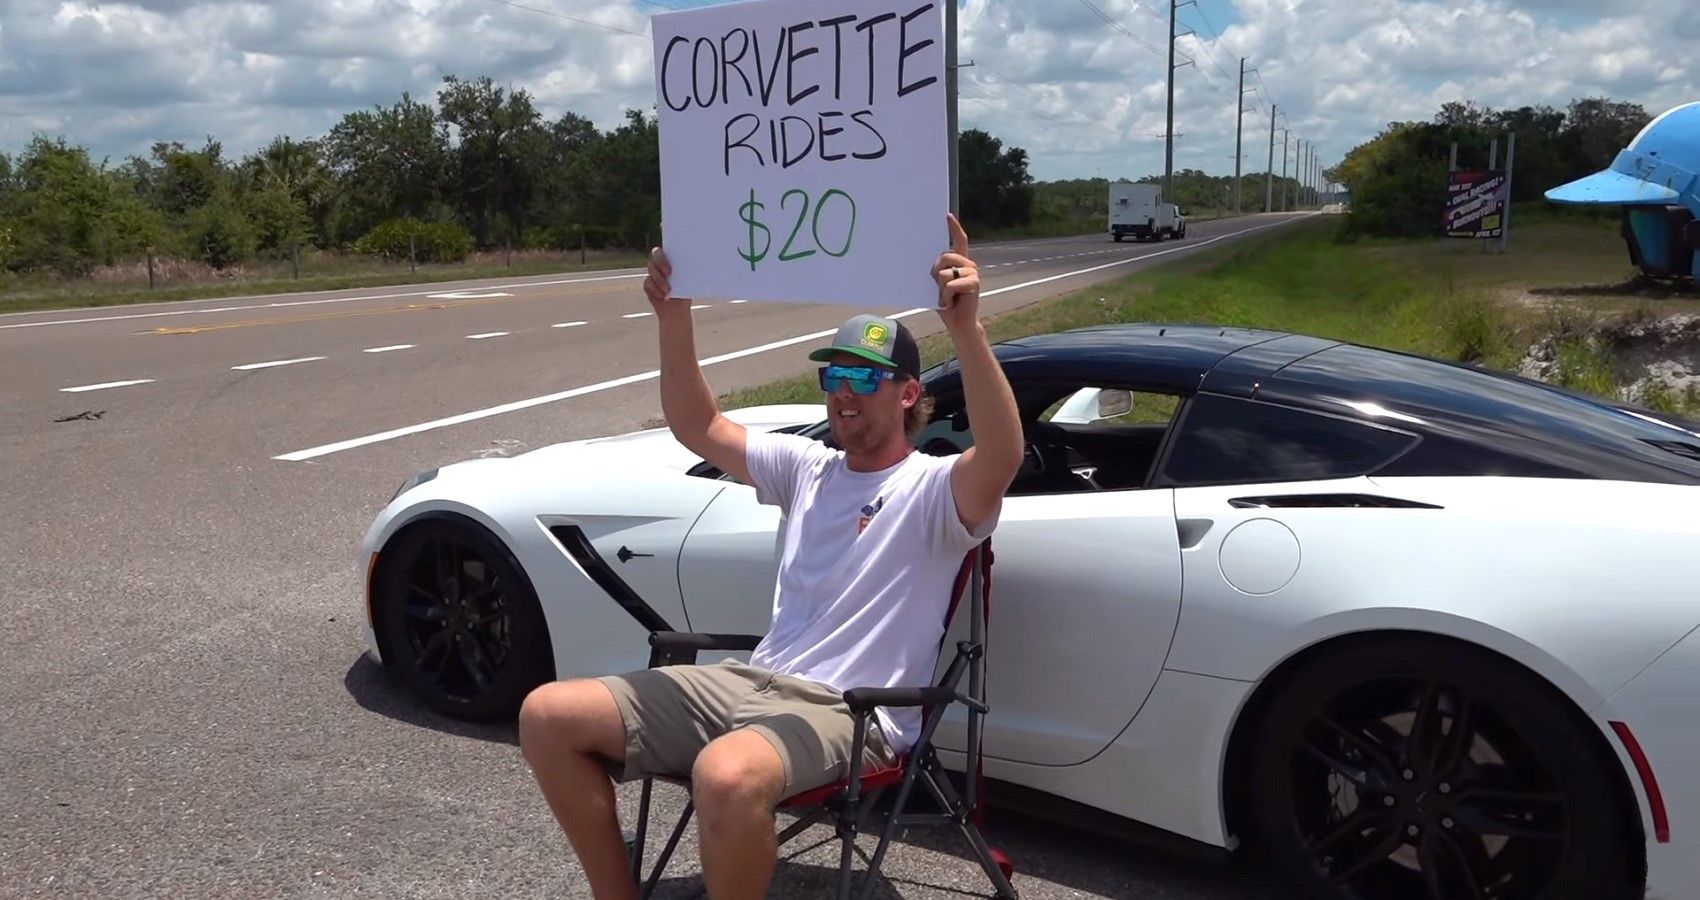 Cleetus McFarland Chevrolet Corvette rides stand, Cleetus sitting infront of car with sign